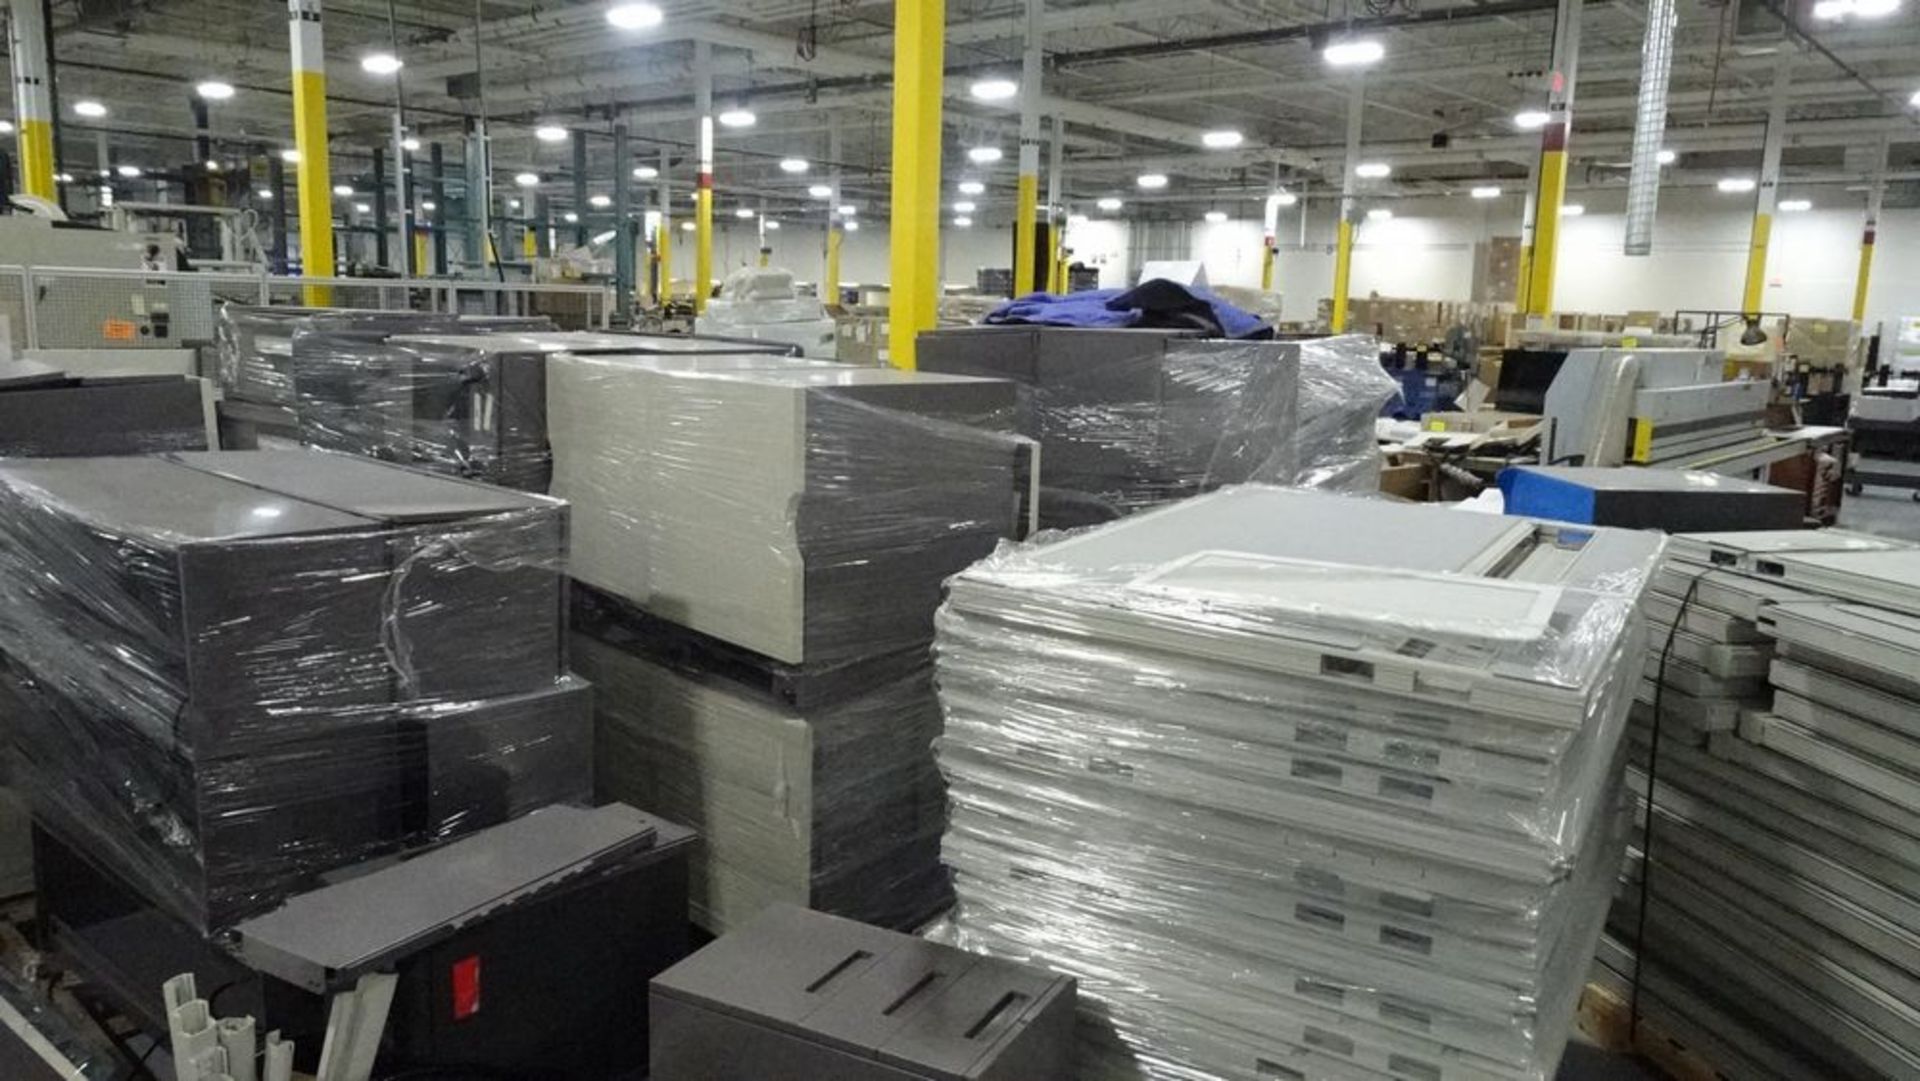 LOT (25) PALLETS OF ASST. OFFICE CUBICLE SYSTEMS, FURNITURE, ETC. (REUTER) - Image 3 of 4